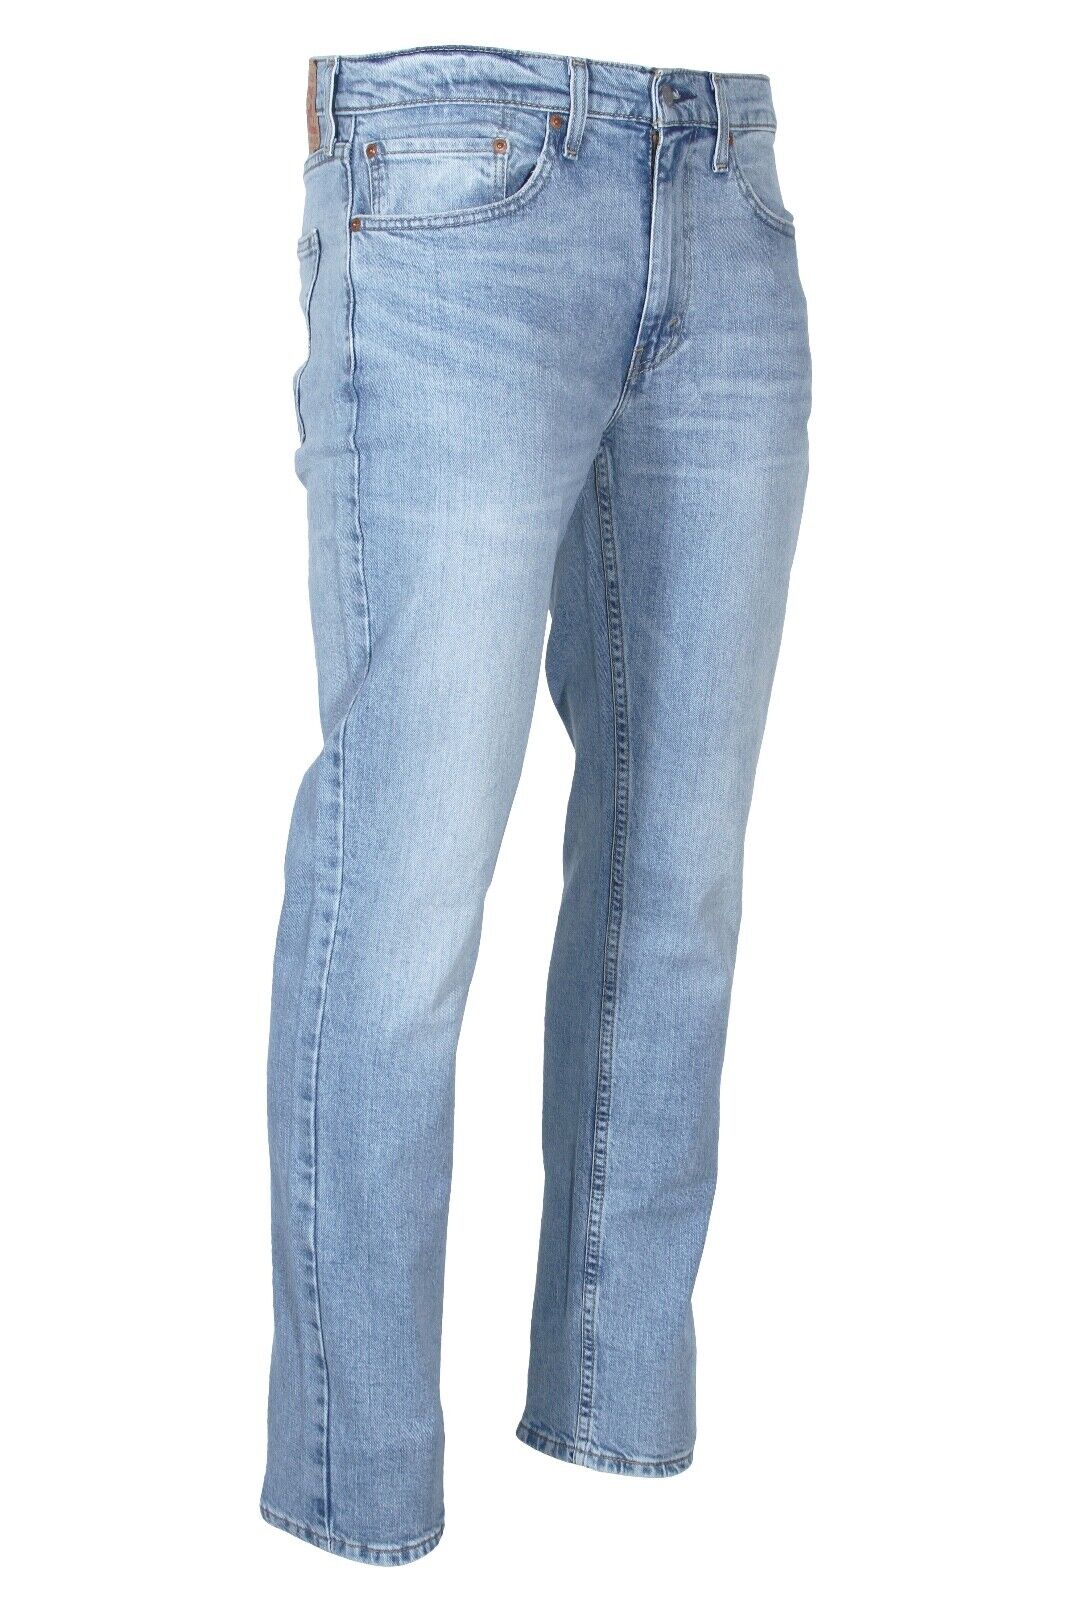 Levi’s 514 Straight Fit Men's Jeans Wash: Only Wish Adv Style# 00514-1867